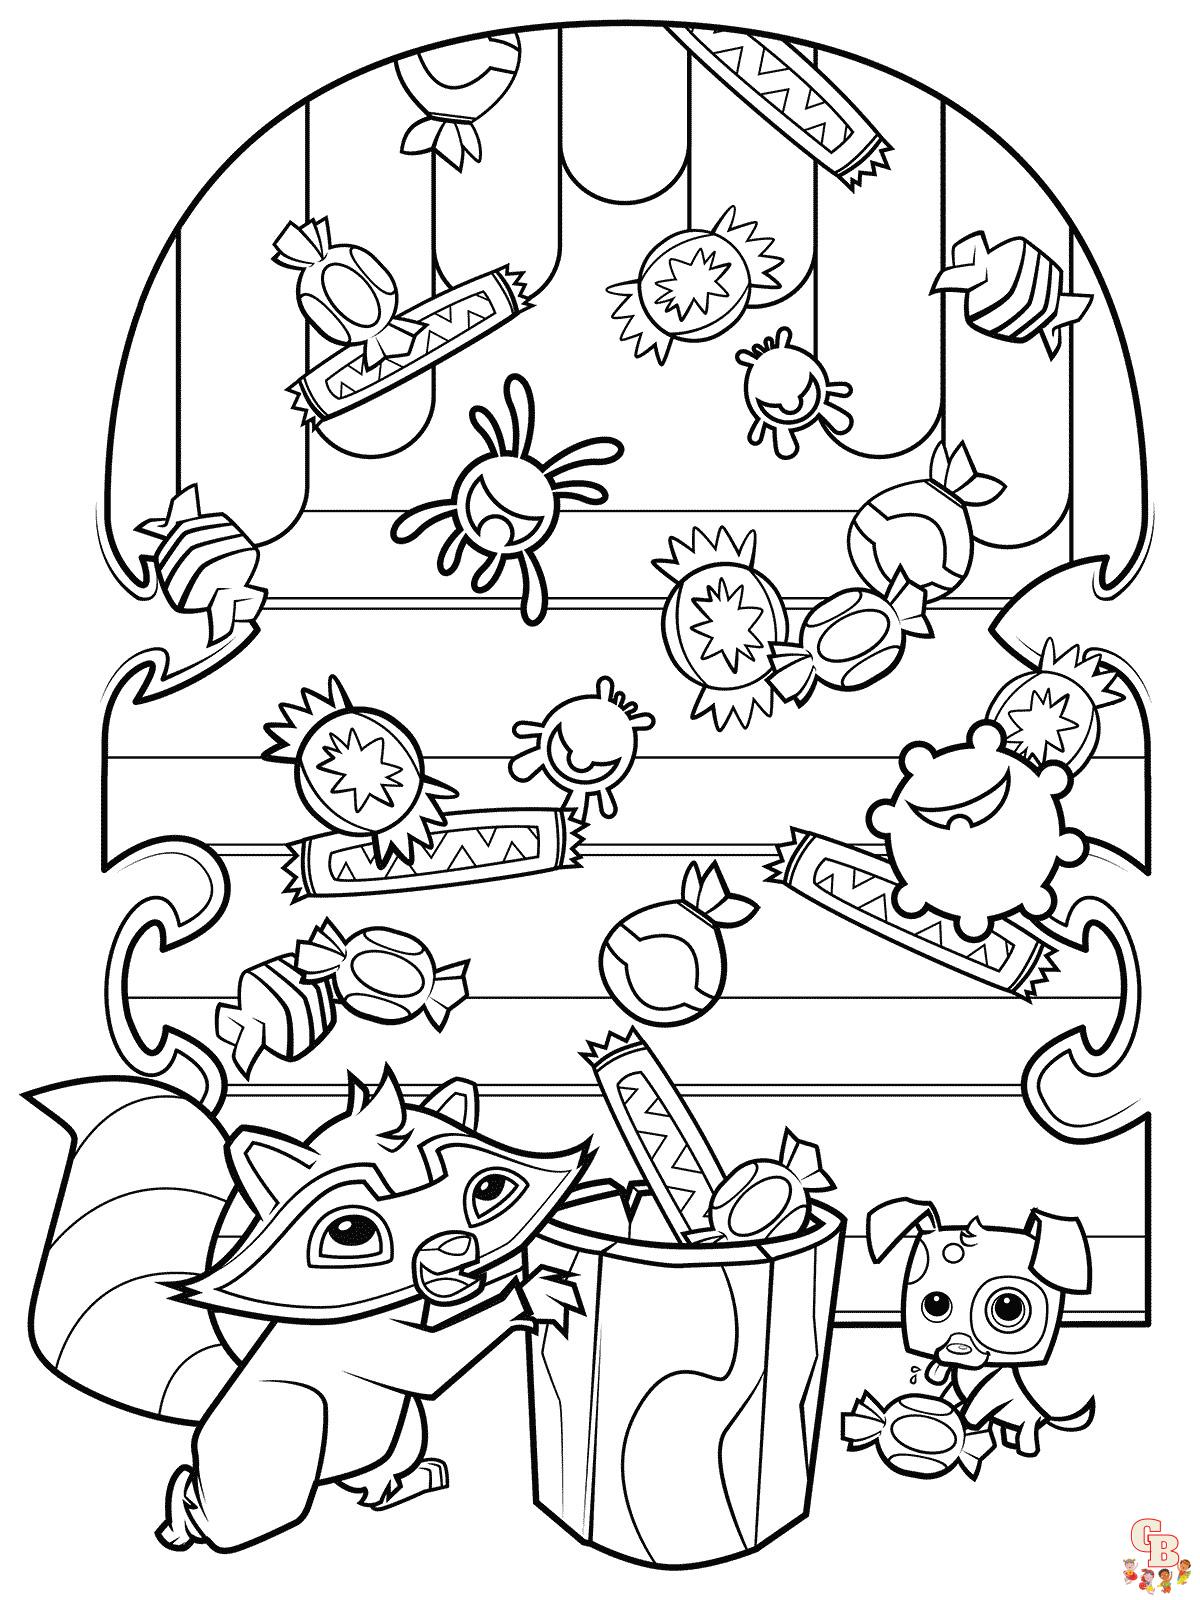 Animal Jam Coloring Pages 32